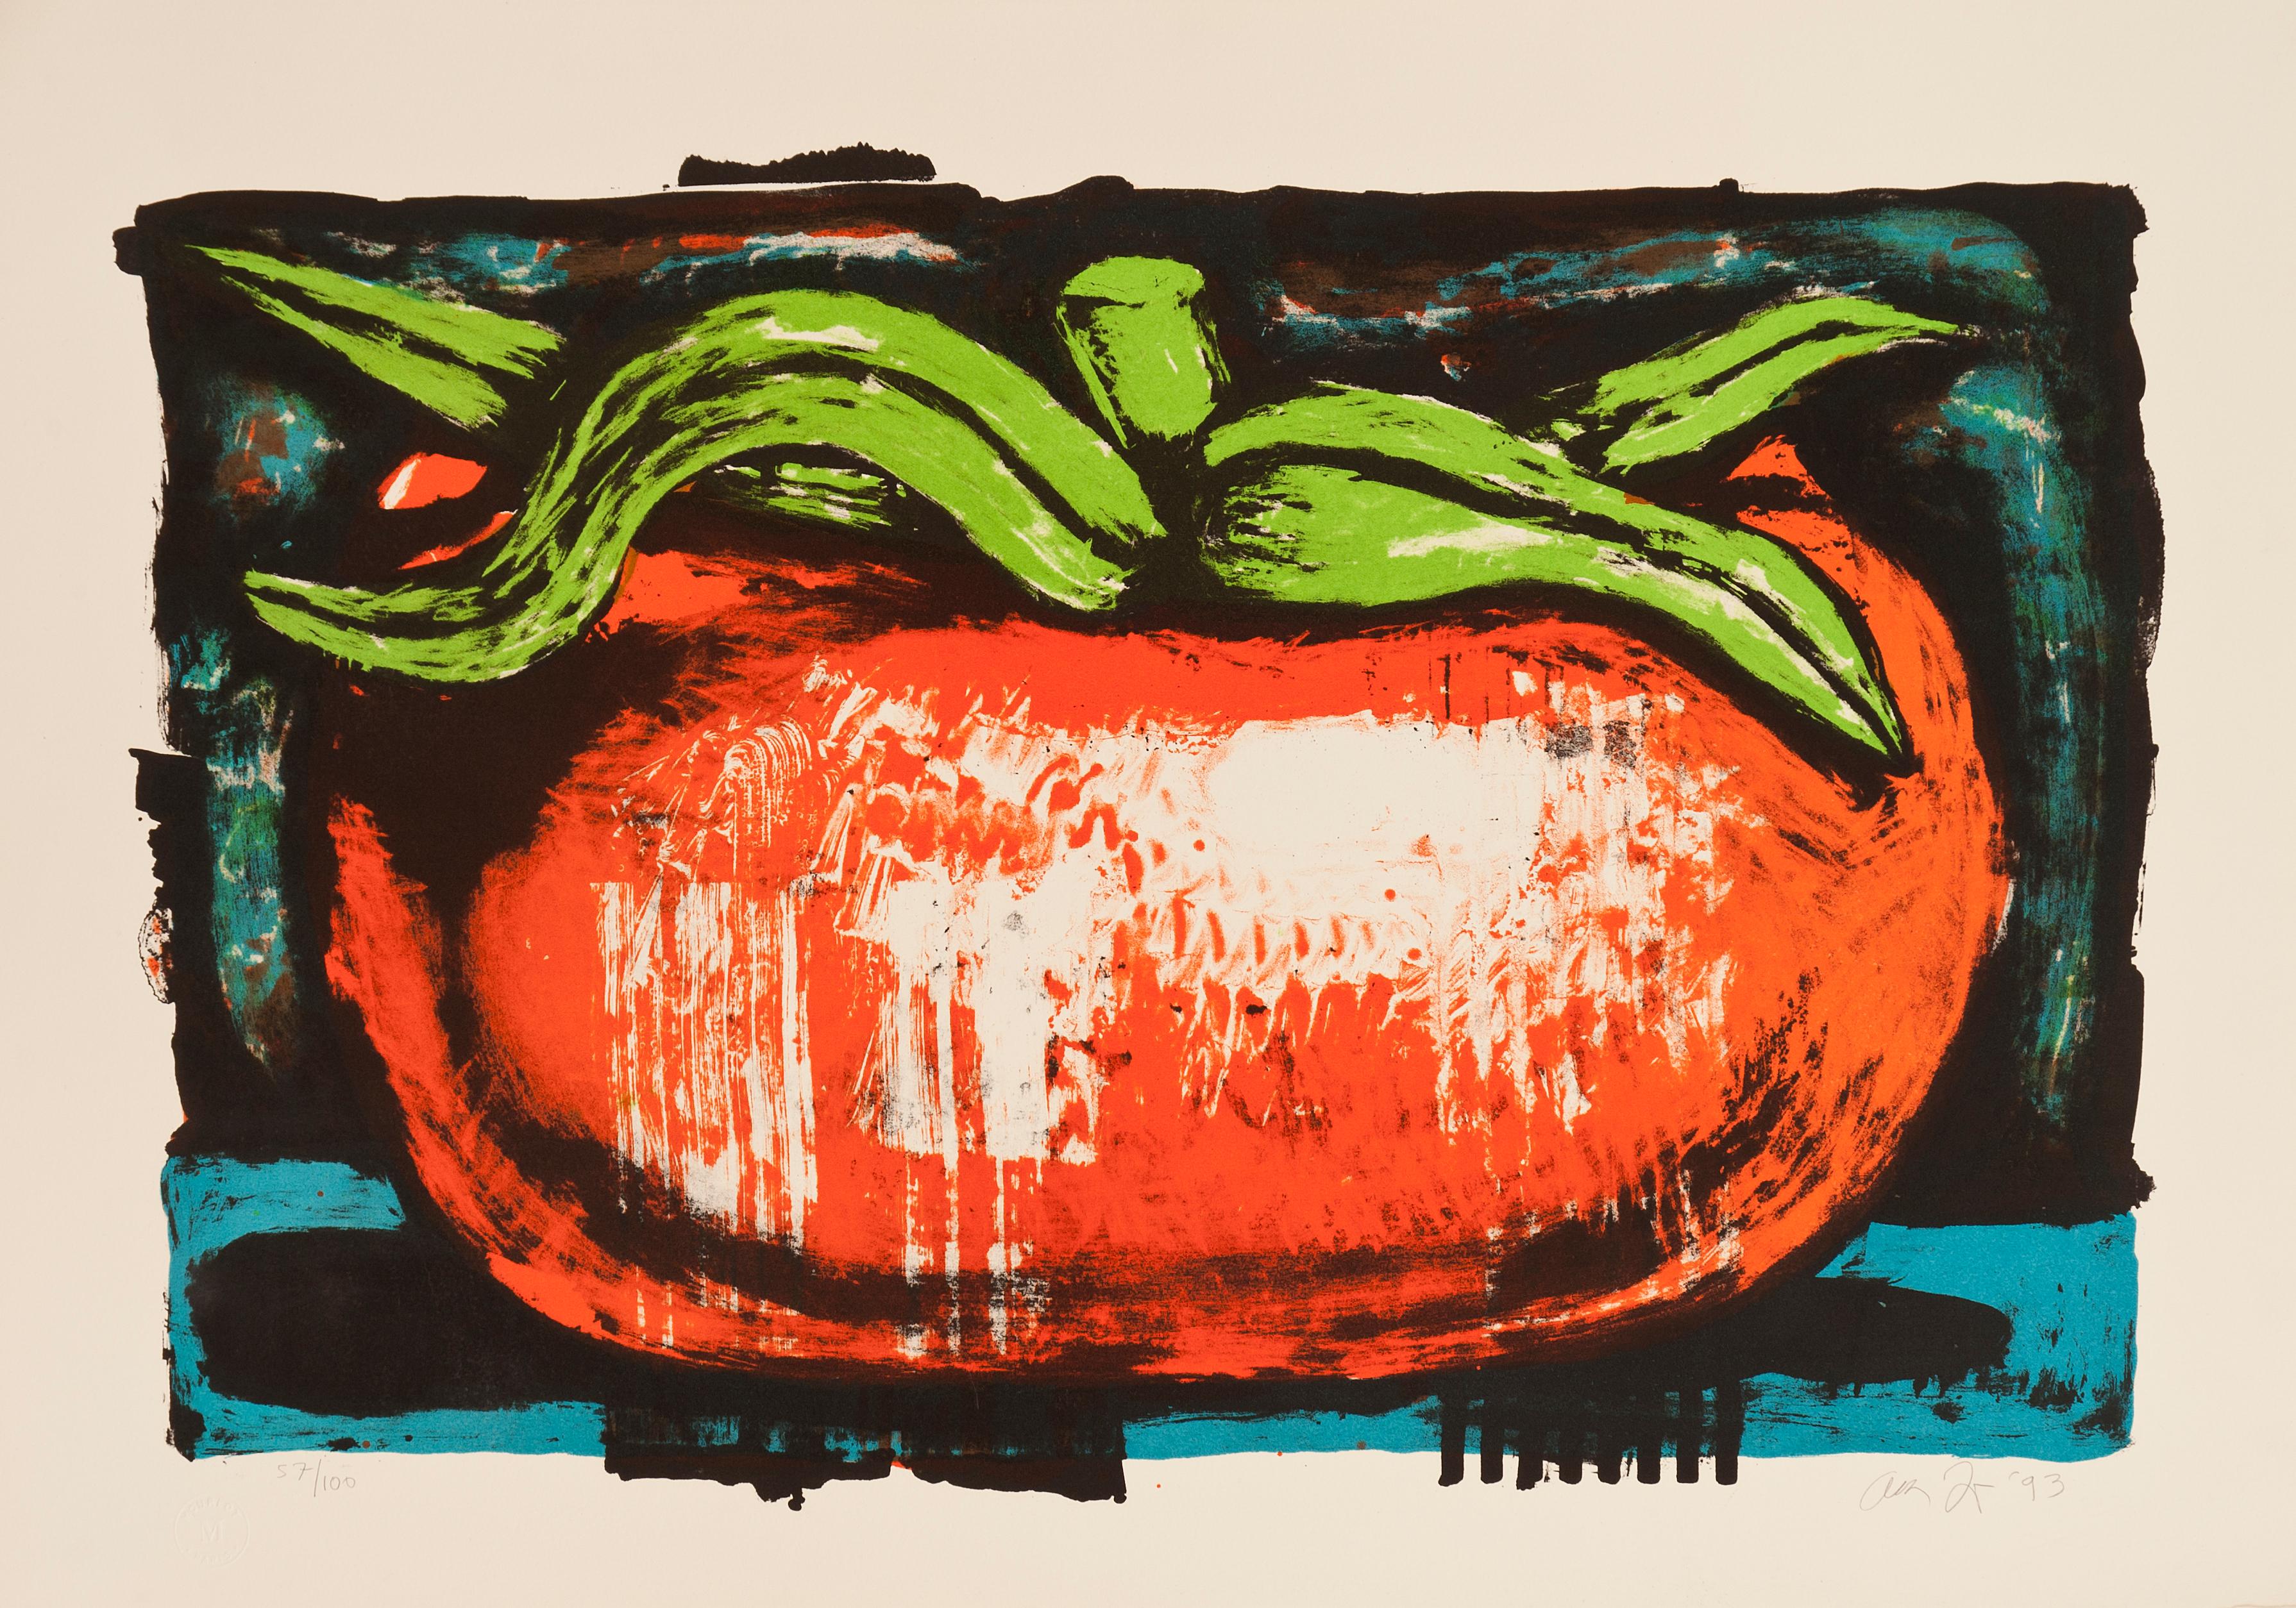 Tomato by Aaron Fink